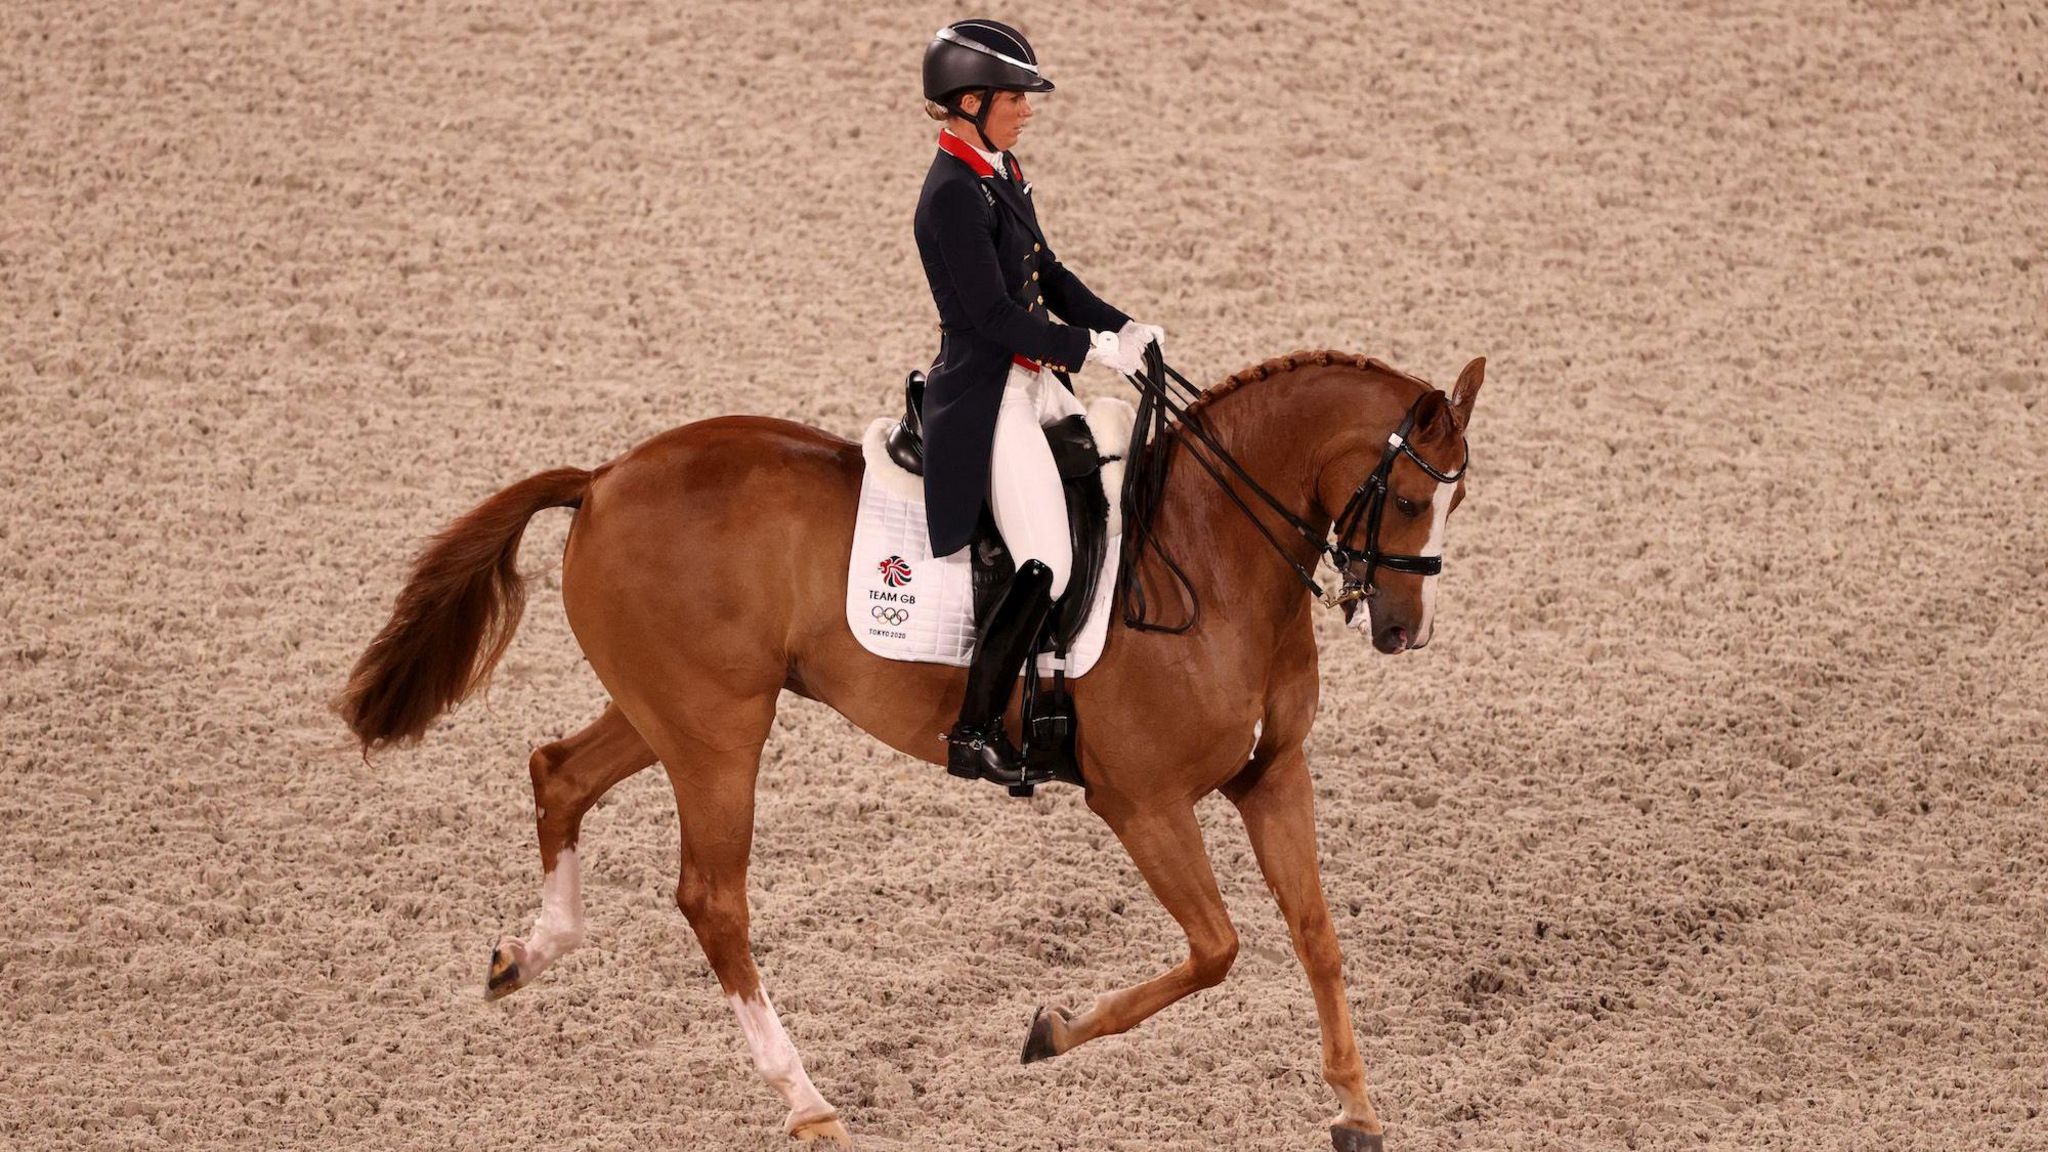 Charlotte Dujardin and her horse Gio competing in the dressage at the Tokyo 2020 Olympics